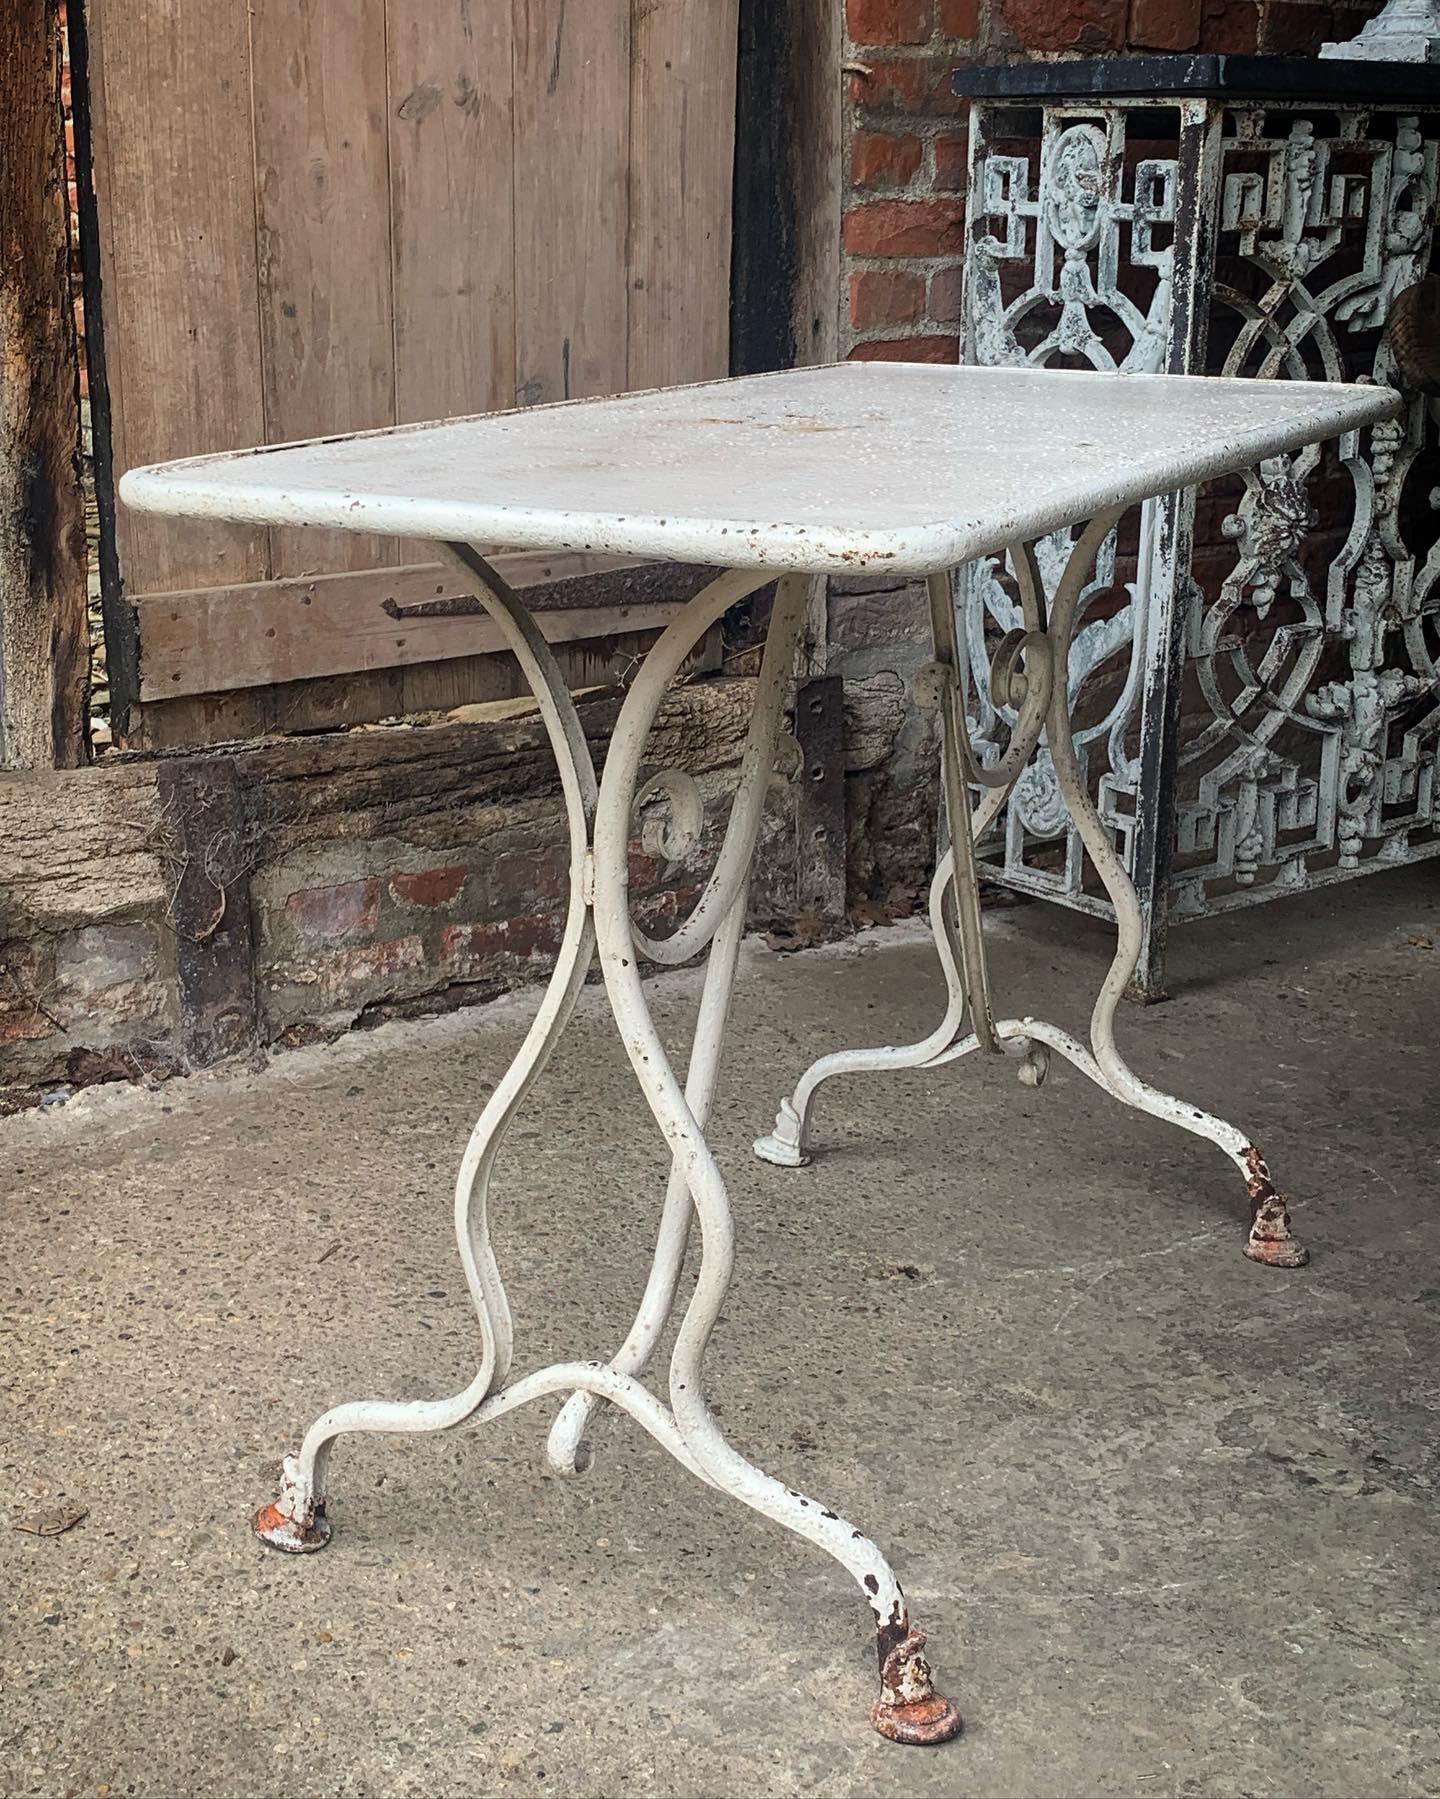 A charming late 19th  early 20th century iron garden table from Arras in northern France. In nice original condition with old weathered paint and Horse hoof feet. Makers badge on rim of table.

Please contact us directly for a worldwide shipping